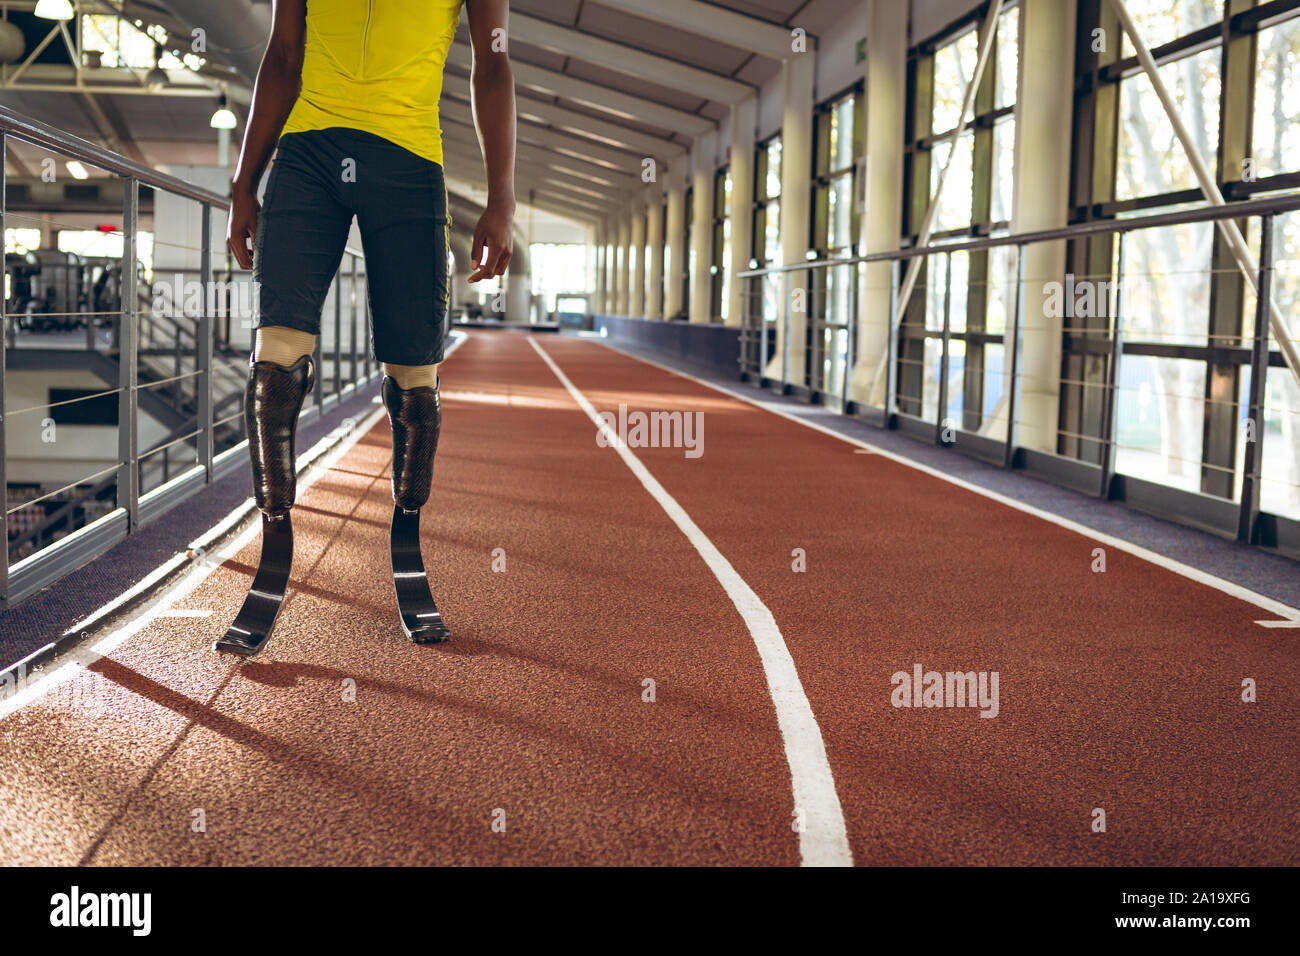 Disabled African American male athletic standing on running track in fitness center Stock Photo